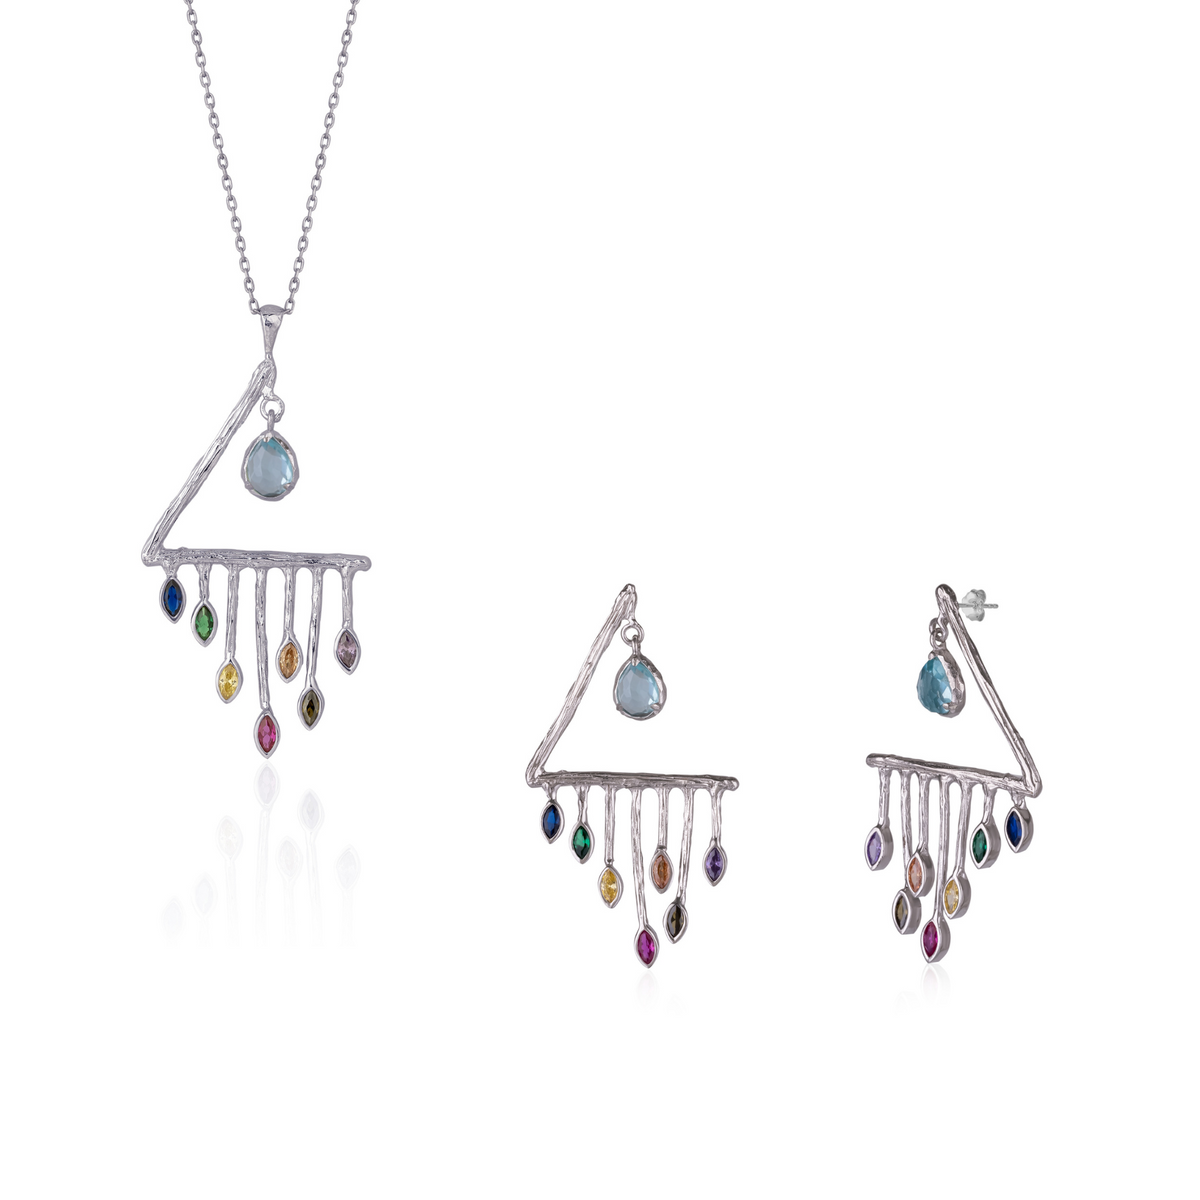 Colourful Rainbow Rain Drop Earring and Necklace Set in Sterling Silver